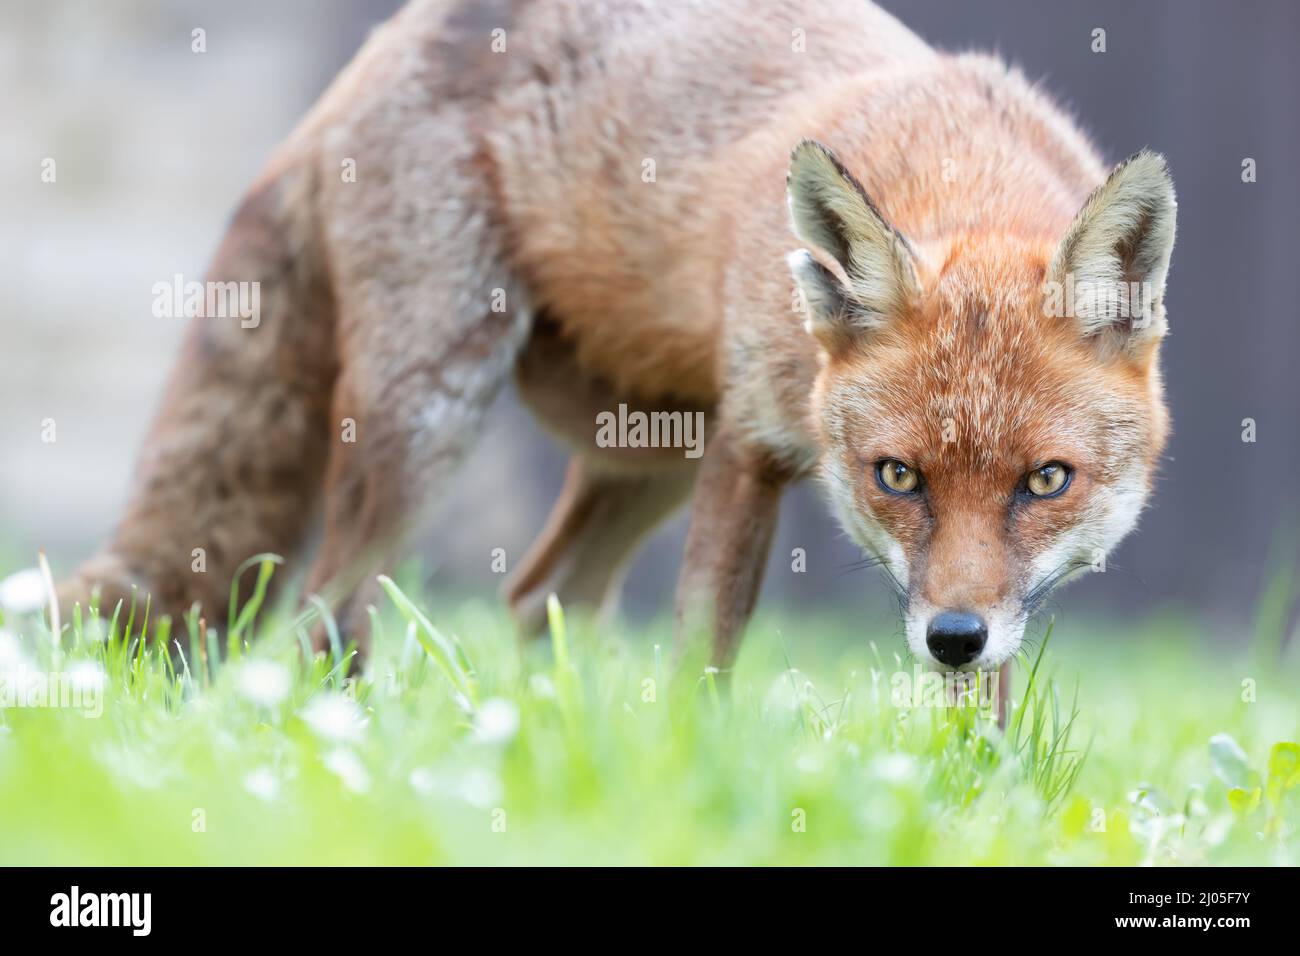 Close up of a red fox (Vulpes vulpes) on a green grass in a garden, United Kingdom. Stock Photo